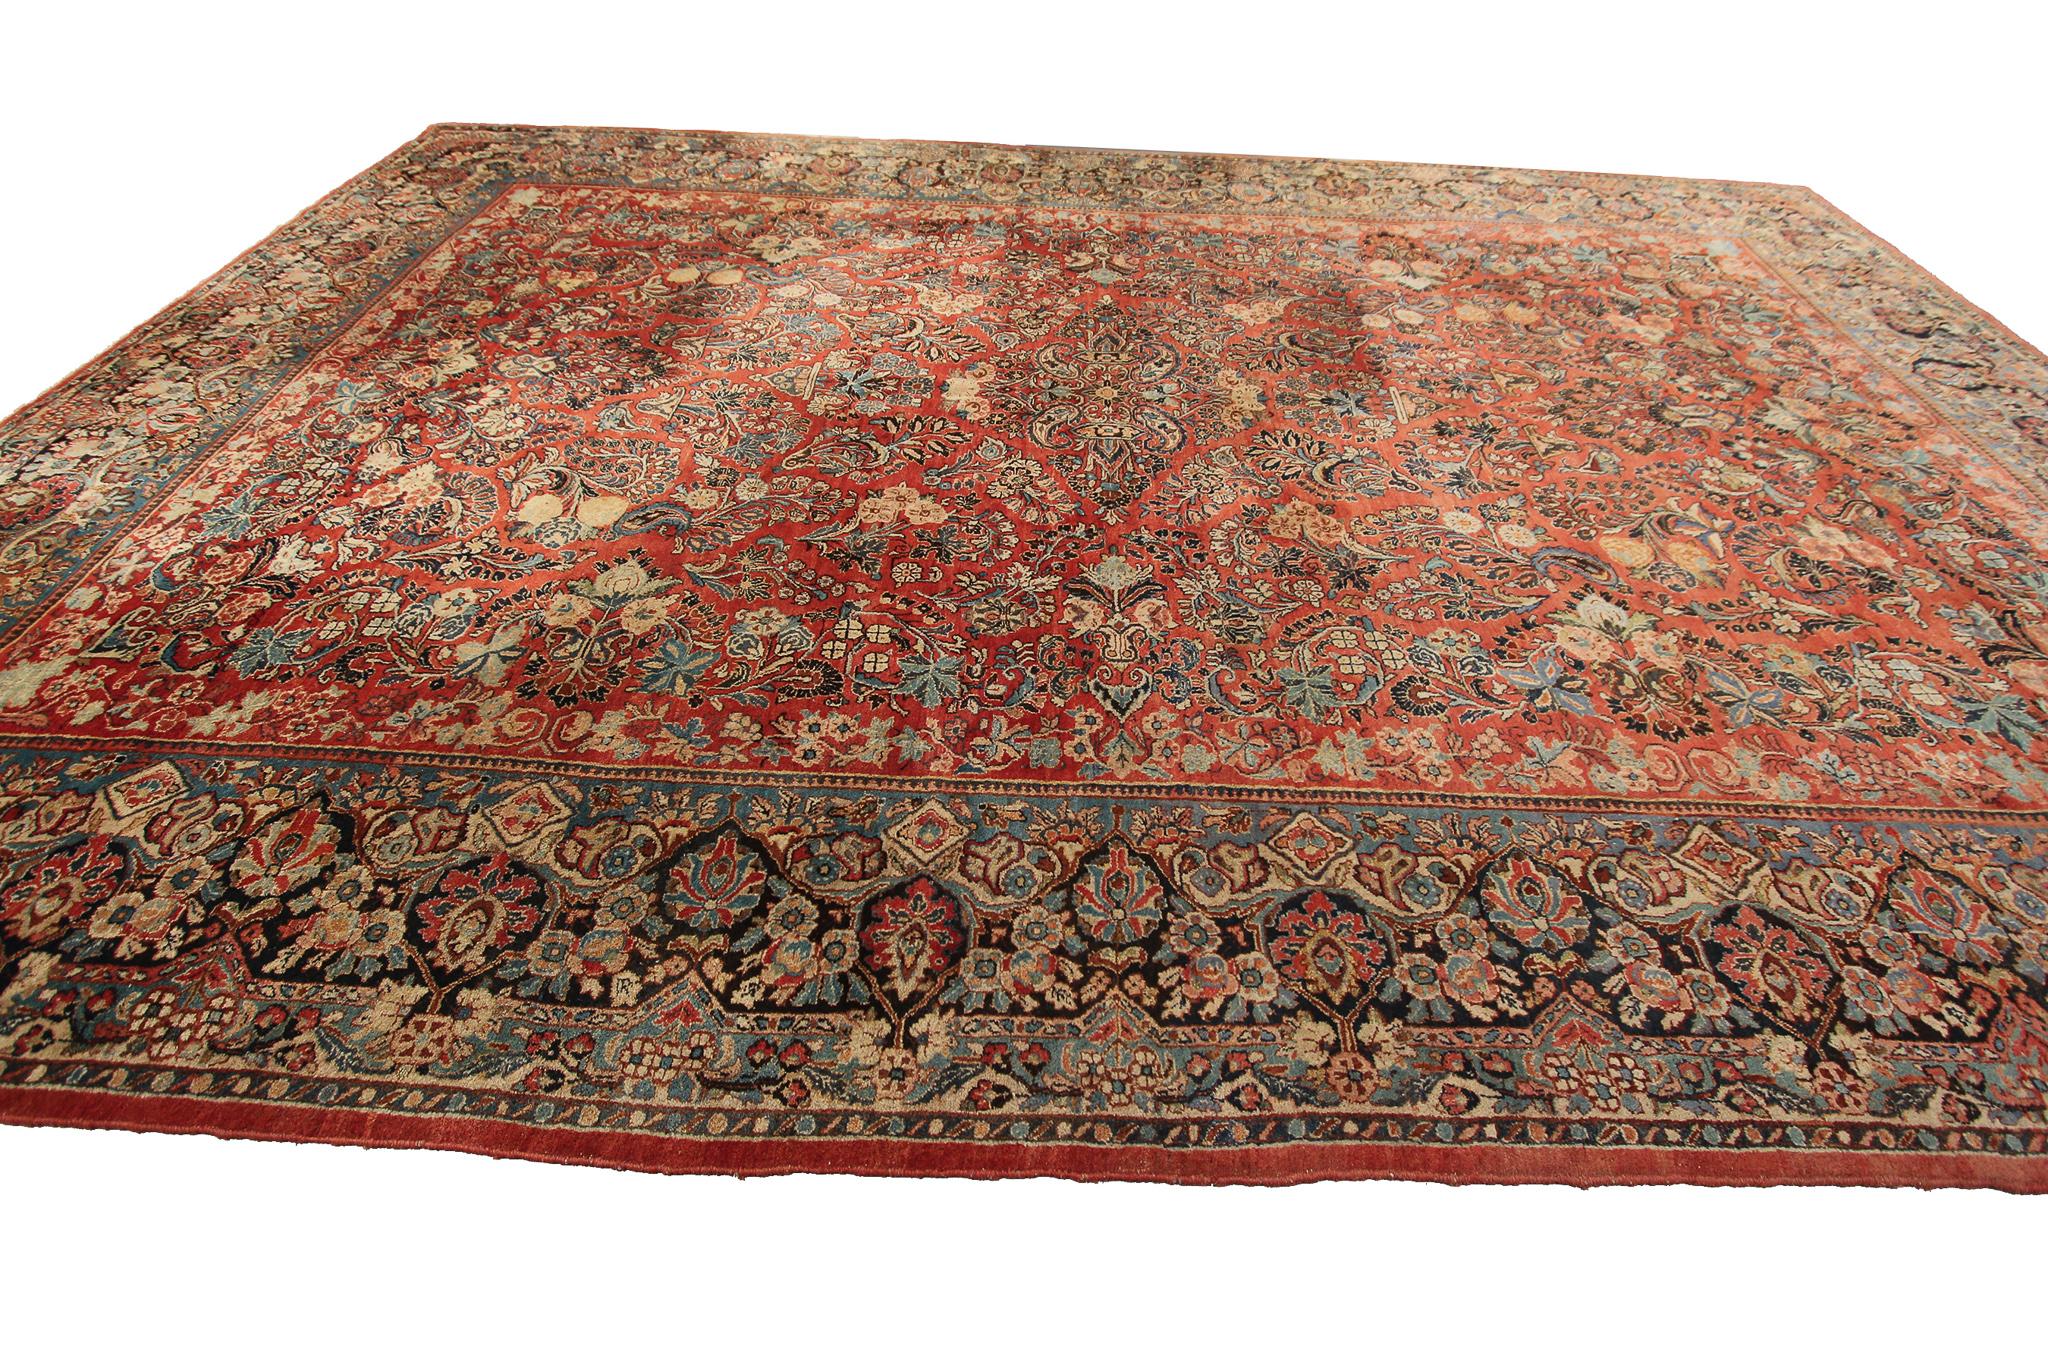 Antique Mohajeran Rug Antique Persian Rug Geometric Floral In Excellent Condition For Sale In New York, NY